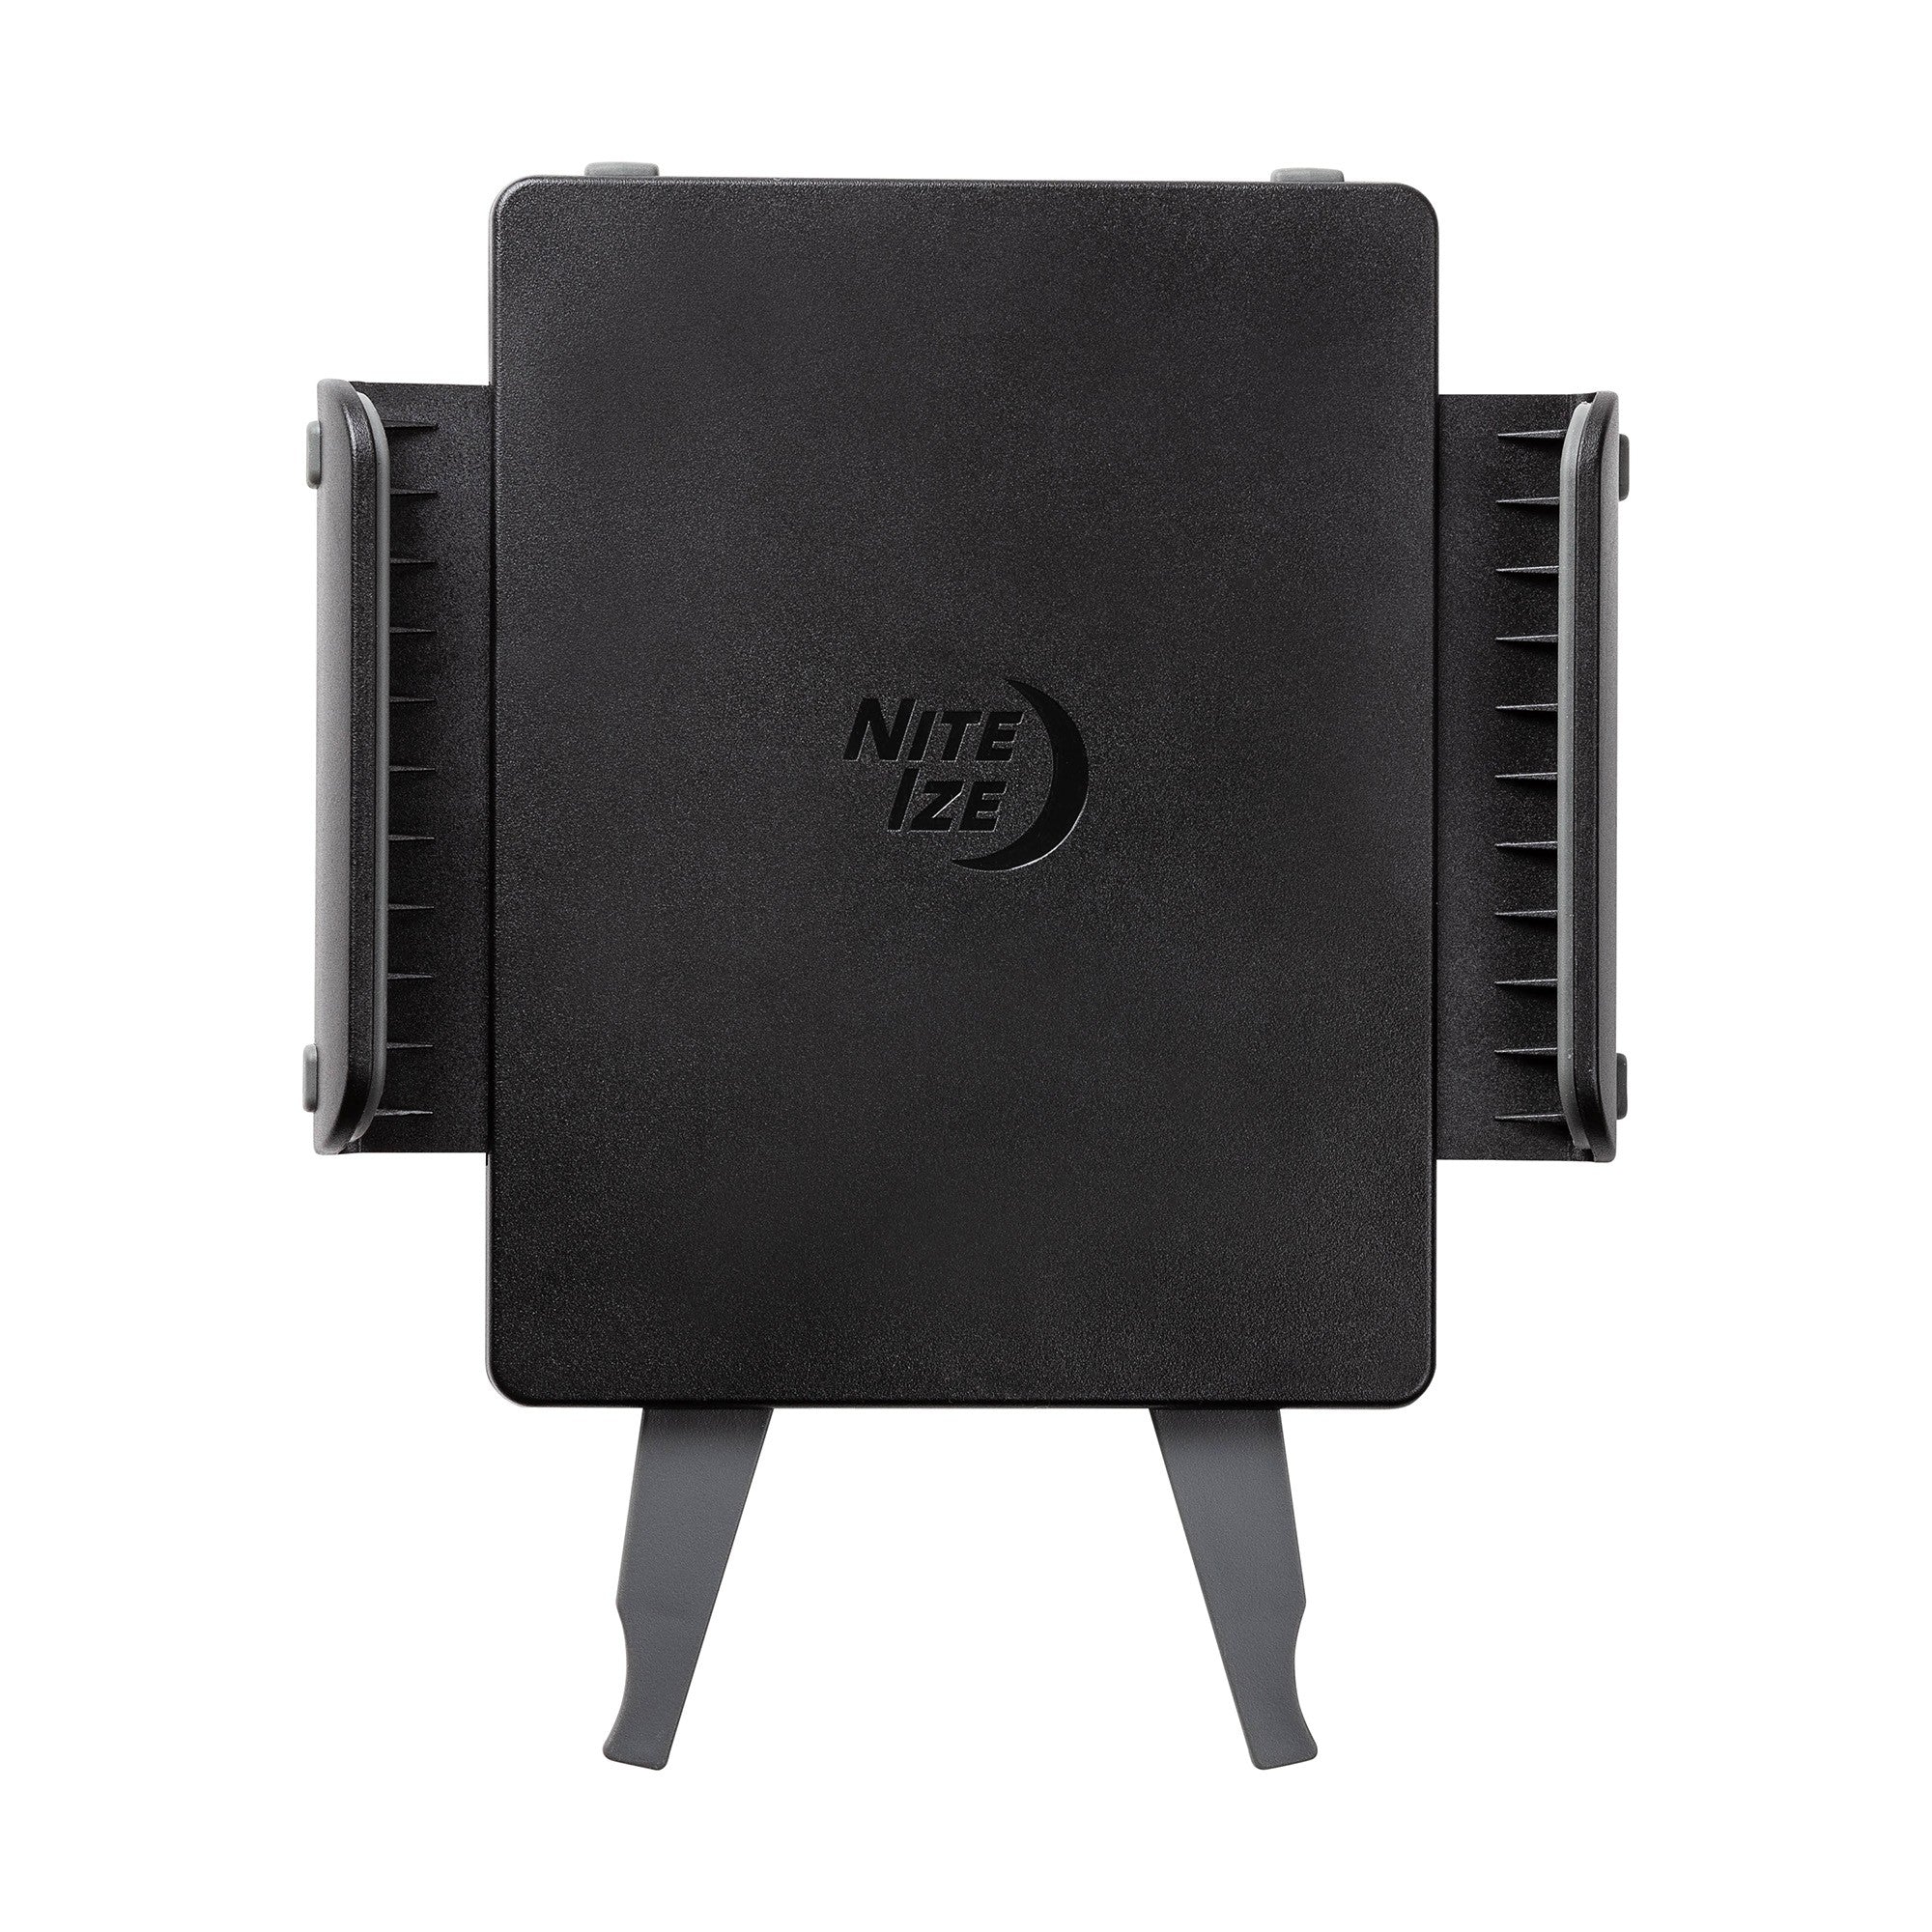 Nite Ize Squeeze Universal Tablet Holder - 15-11171